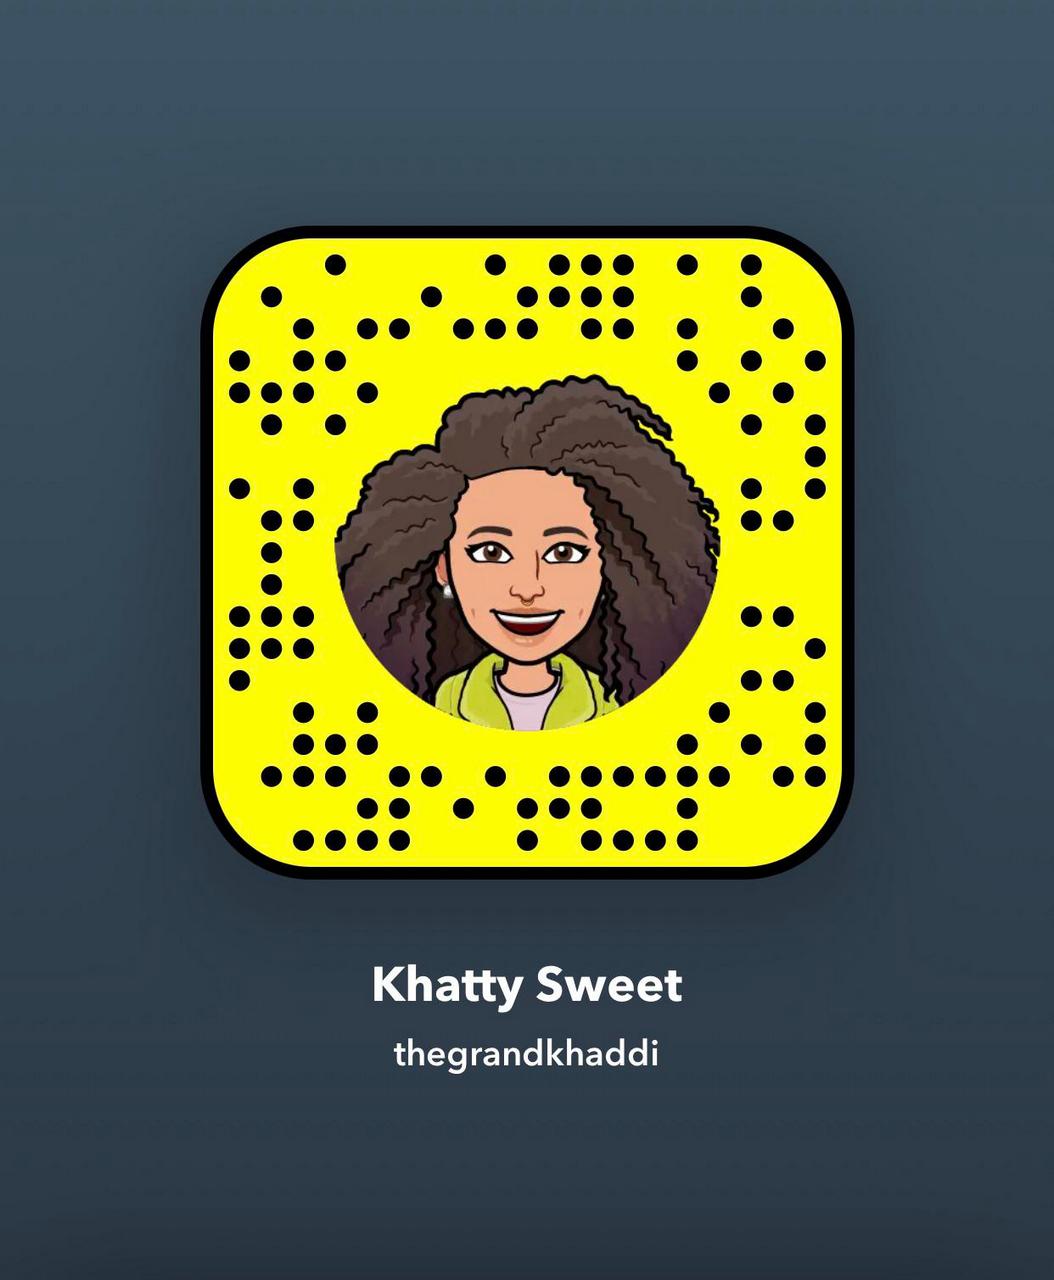 Add Up She Is Hot And Good On I